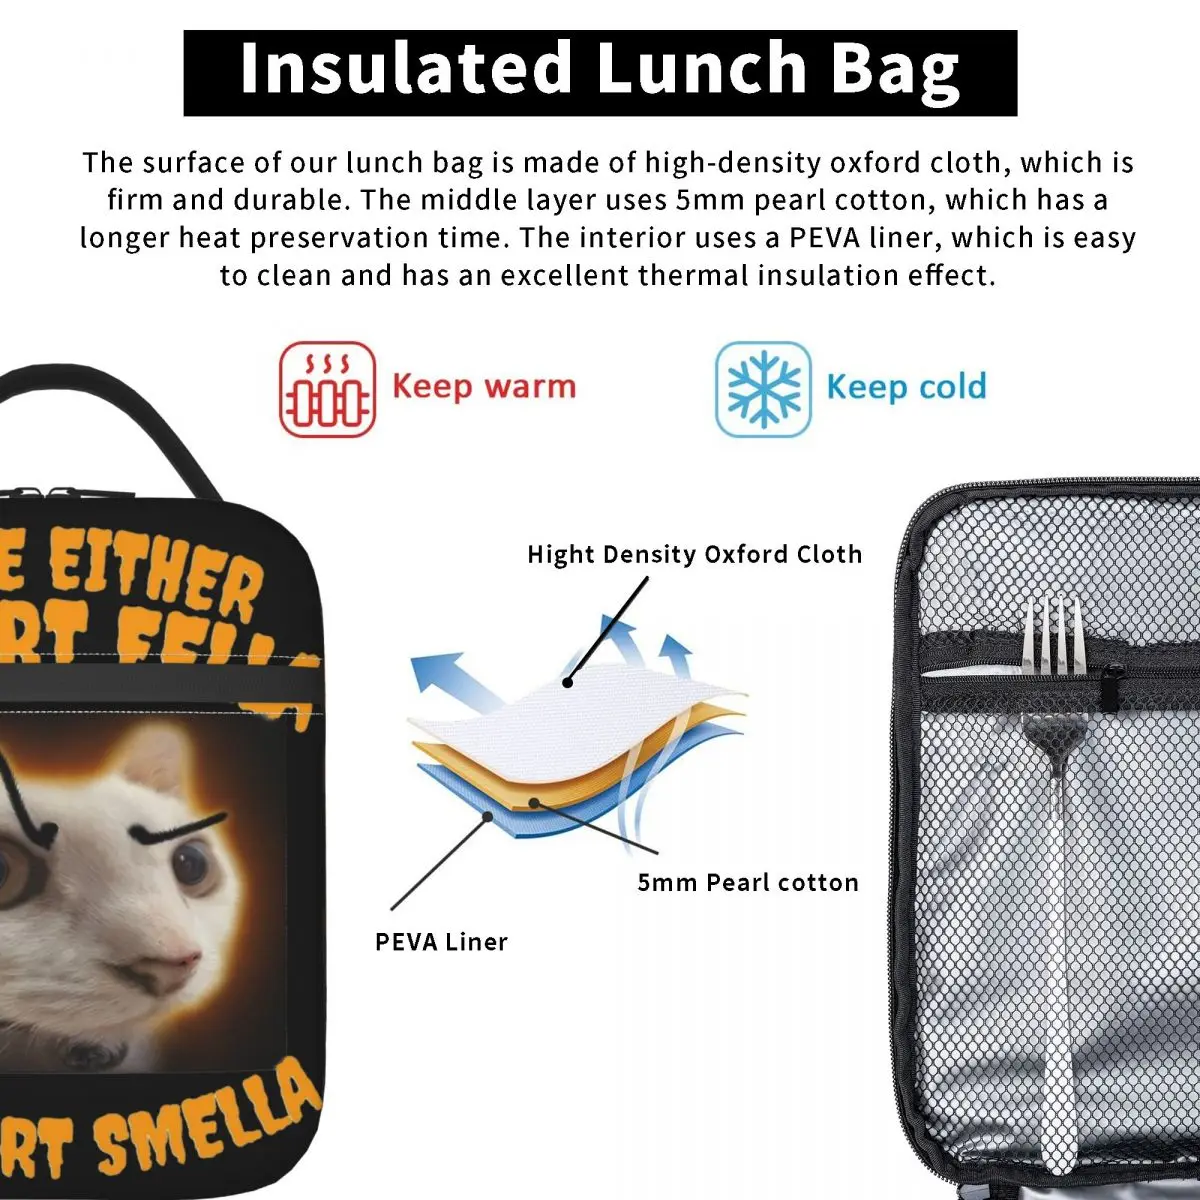 Insulated Lunch Boxes You're A Smart Fella Or A Fart Smella Funny Cartoon Food Box Fashion Cooler Thermal Lunch Box For School